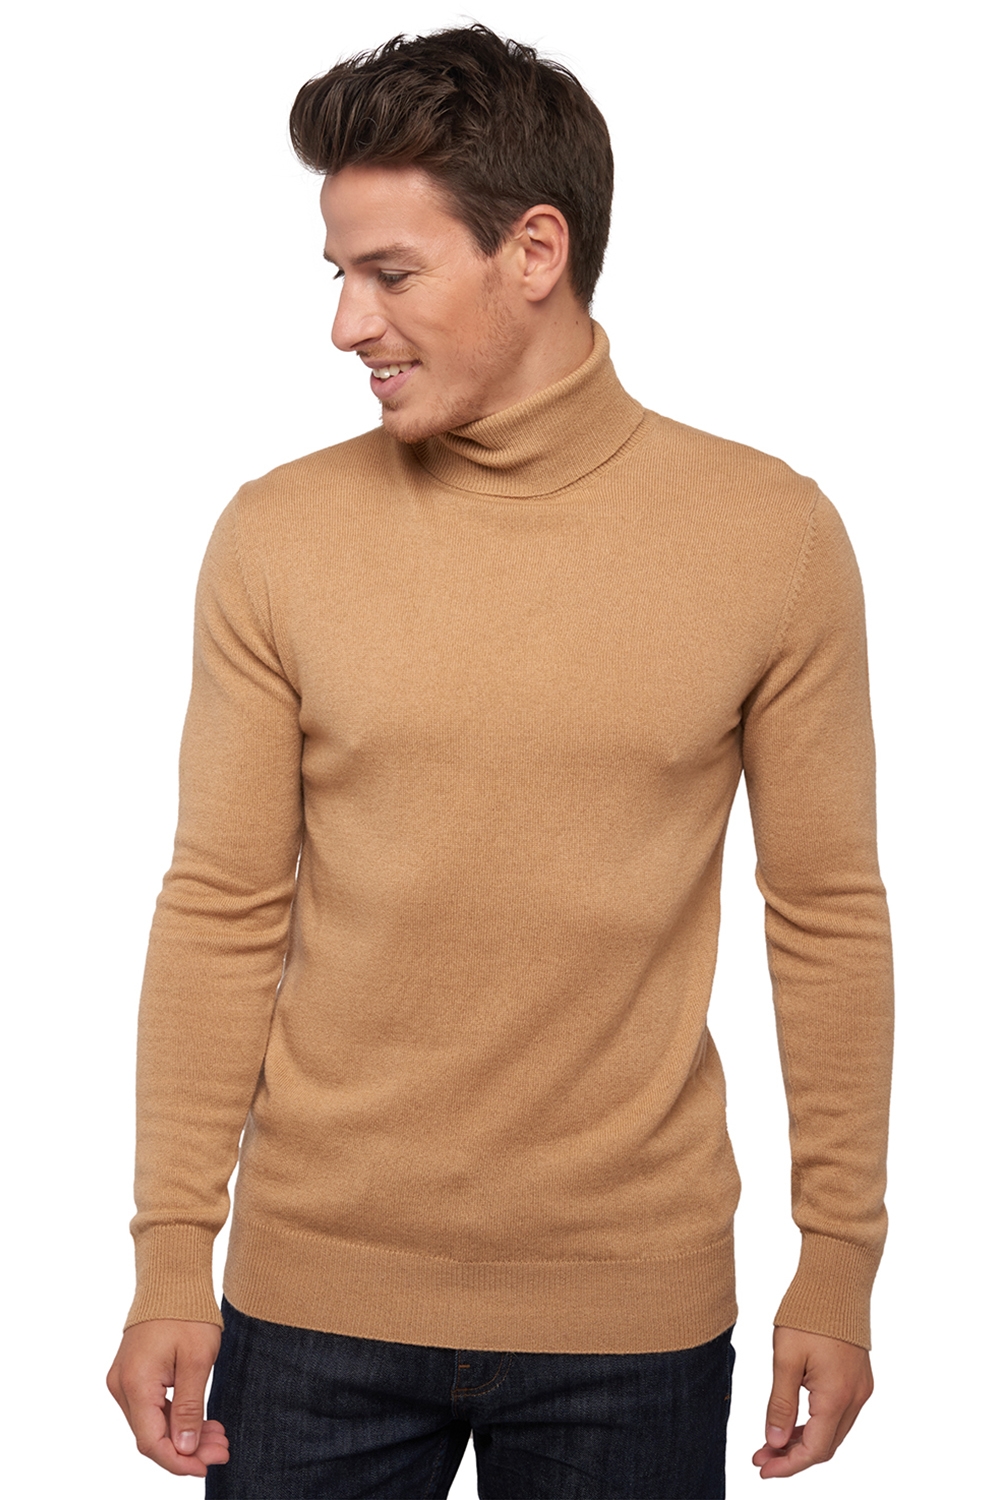 Cashmere men low prices tarry first camel m